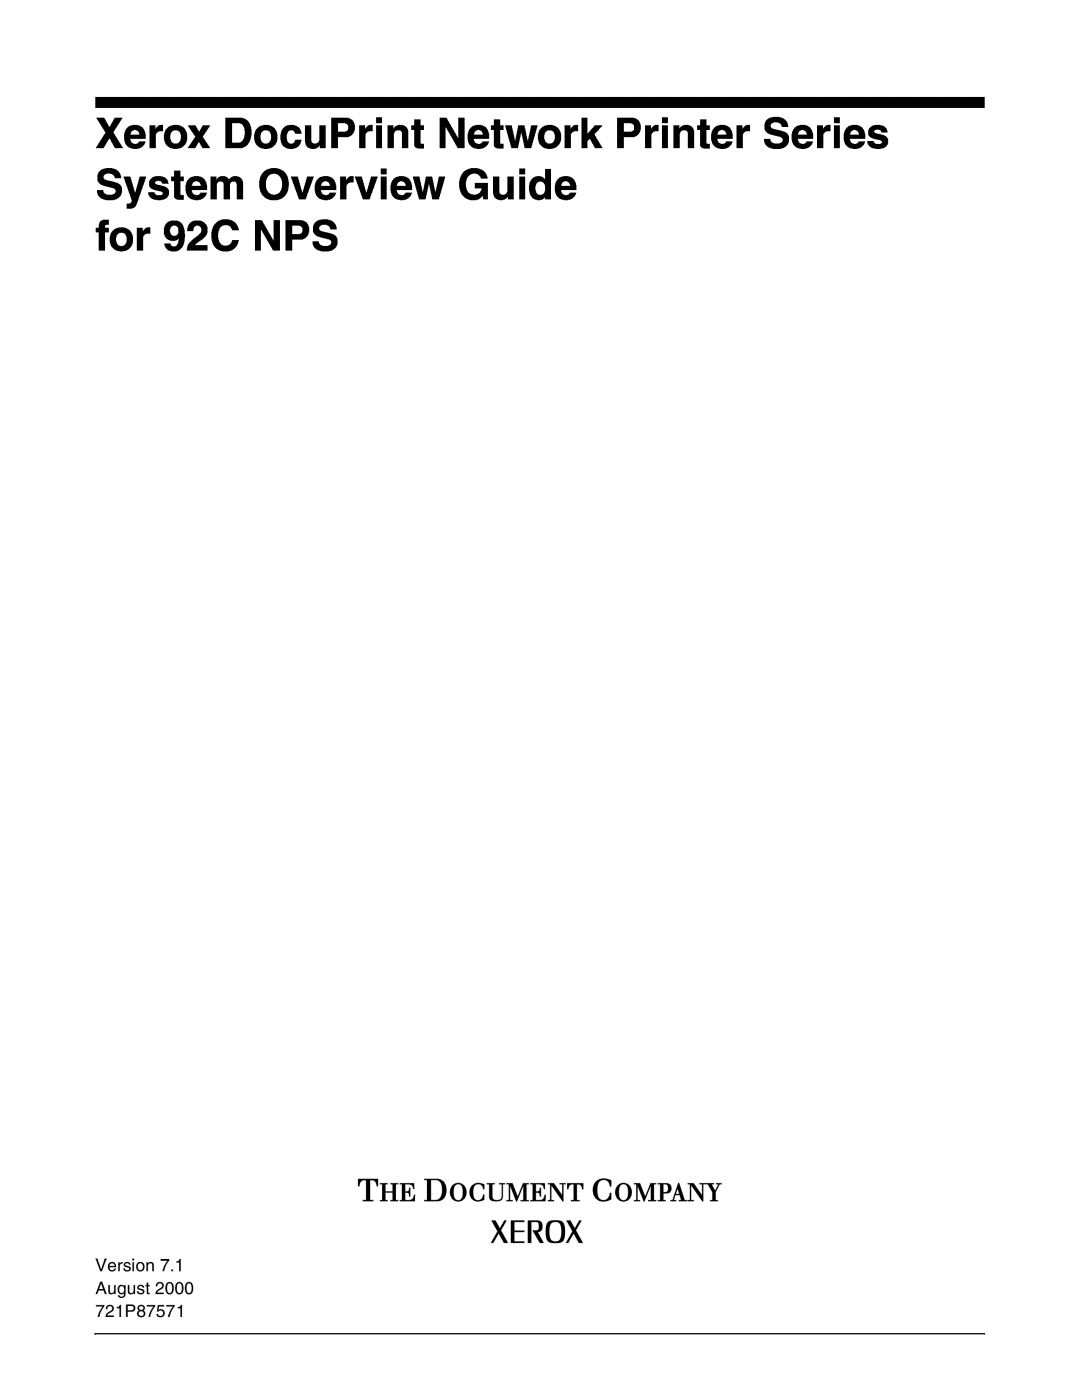 Xerox manual Xerox DocuPrint Network Printer Series System Overview Guide, for 92C NPS 